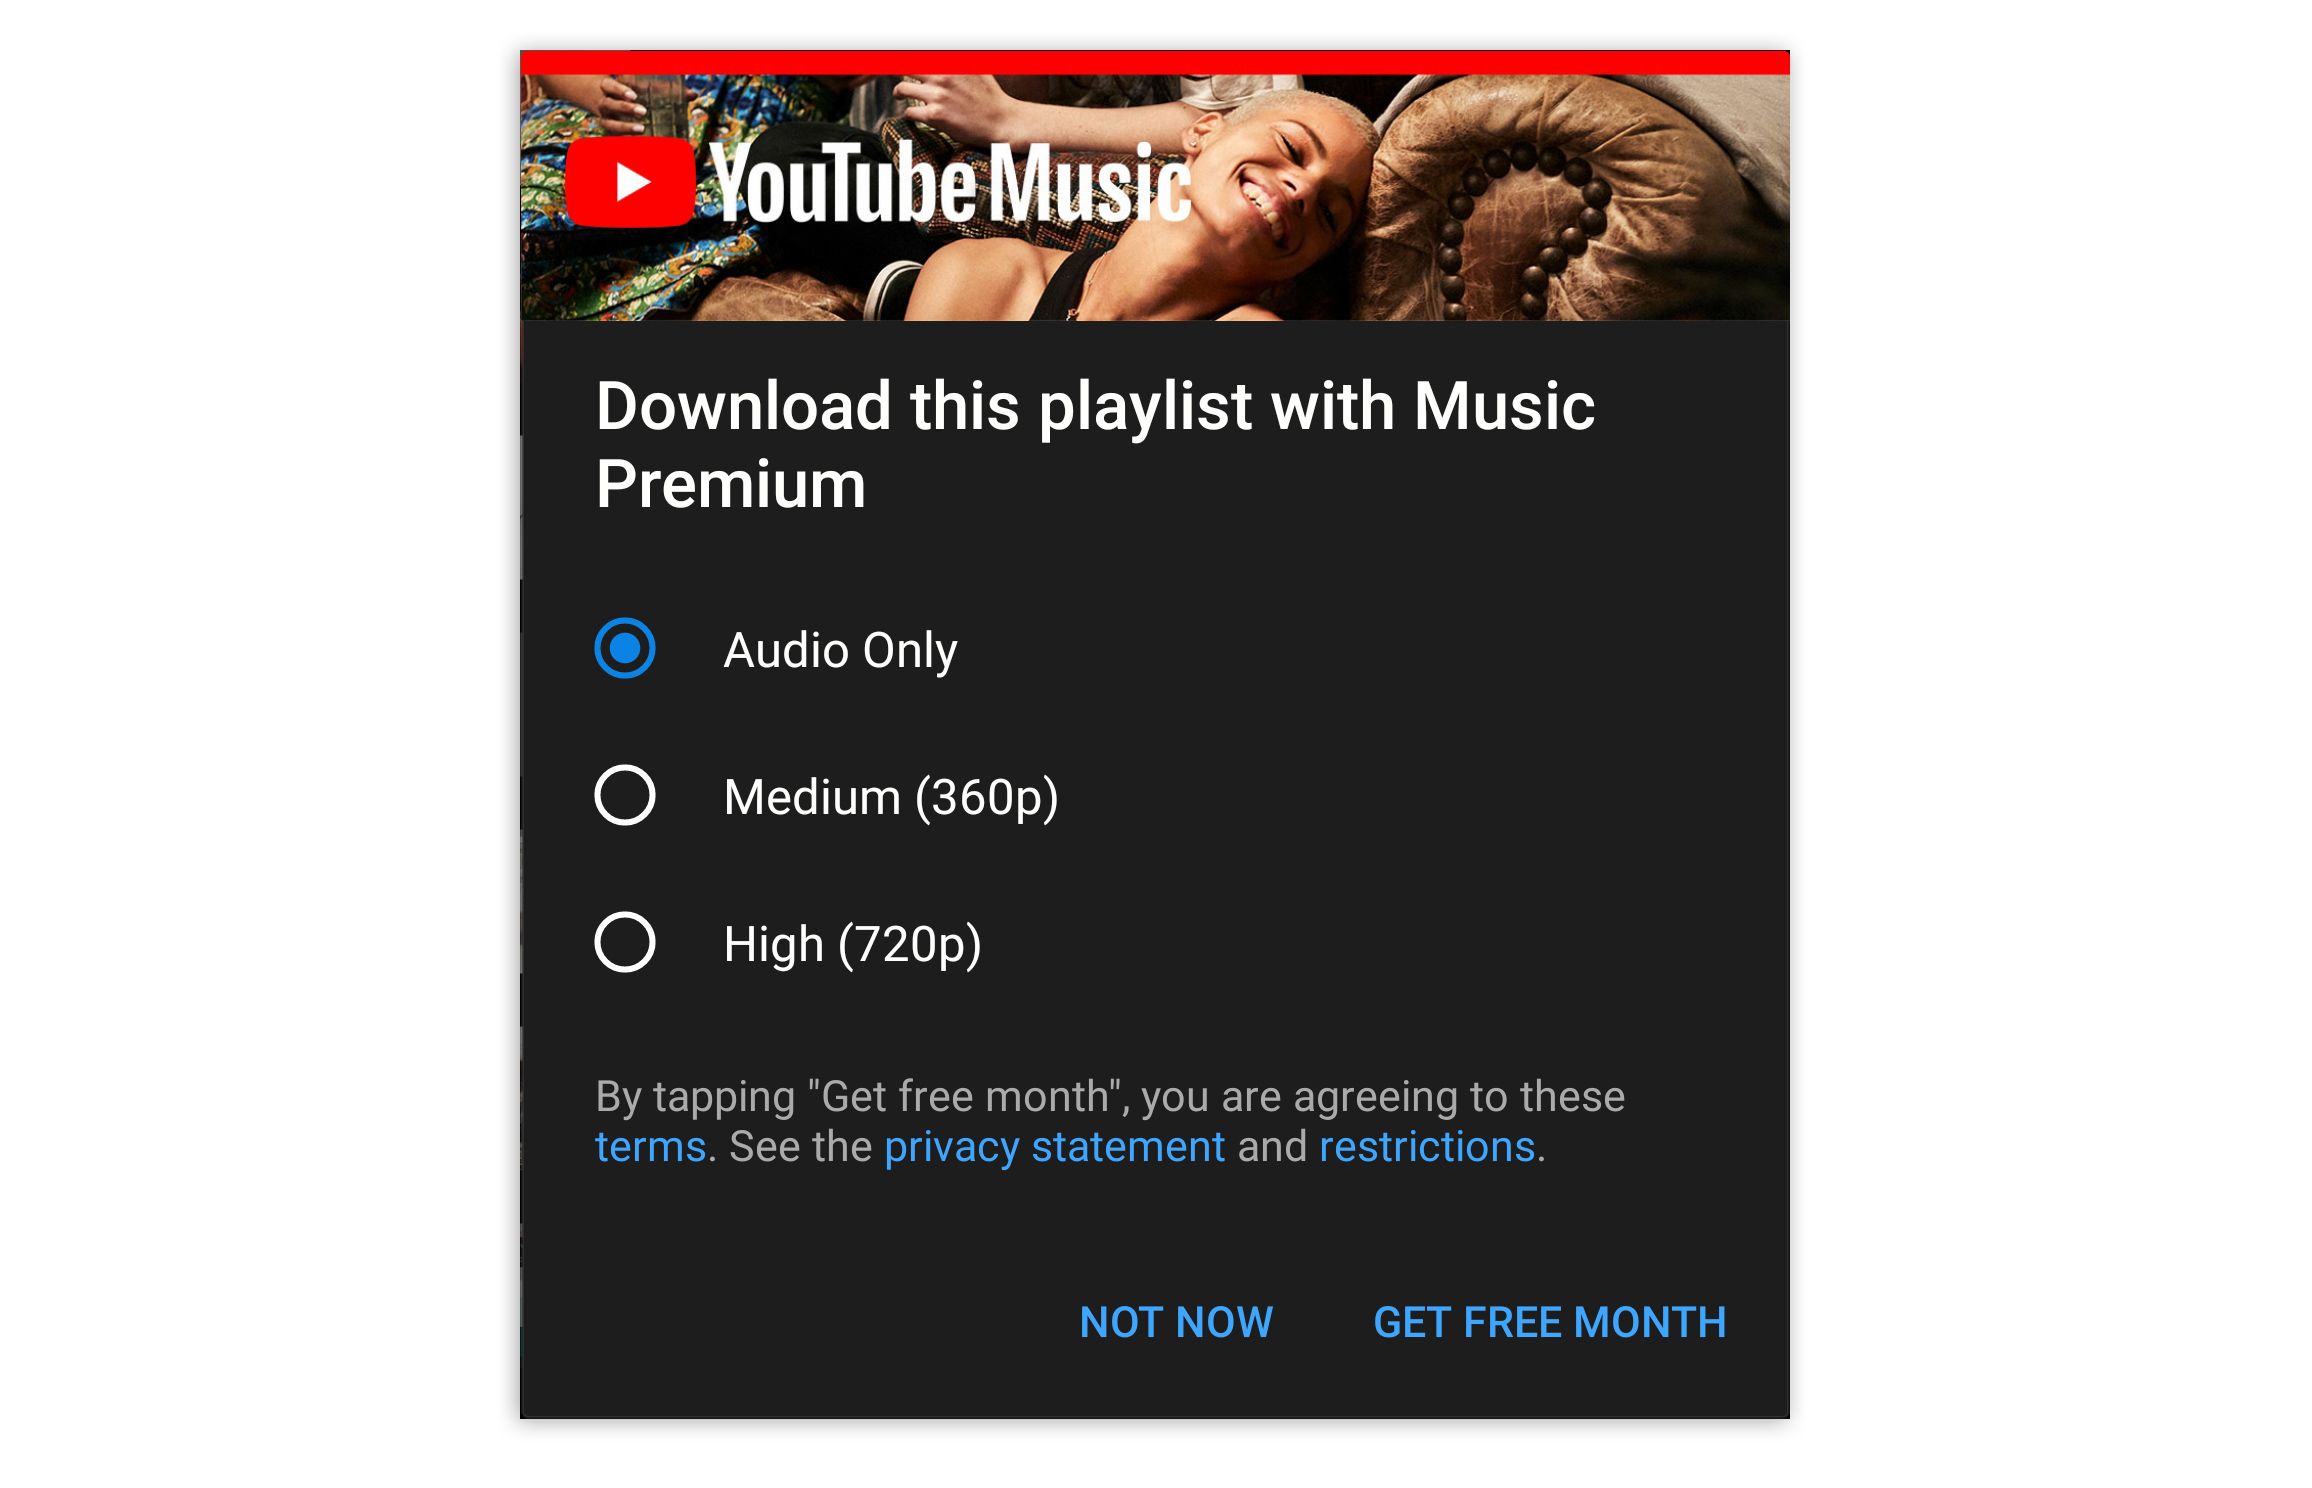 youtube music download my music